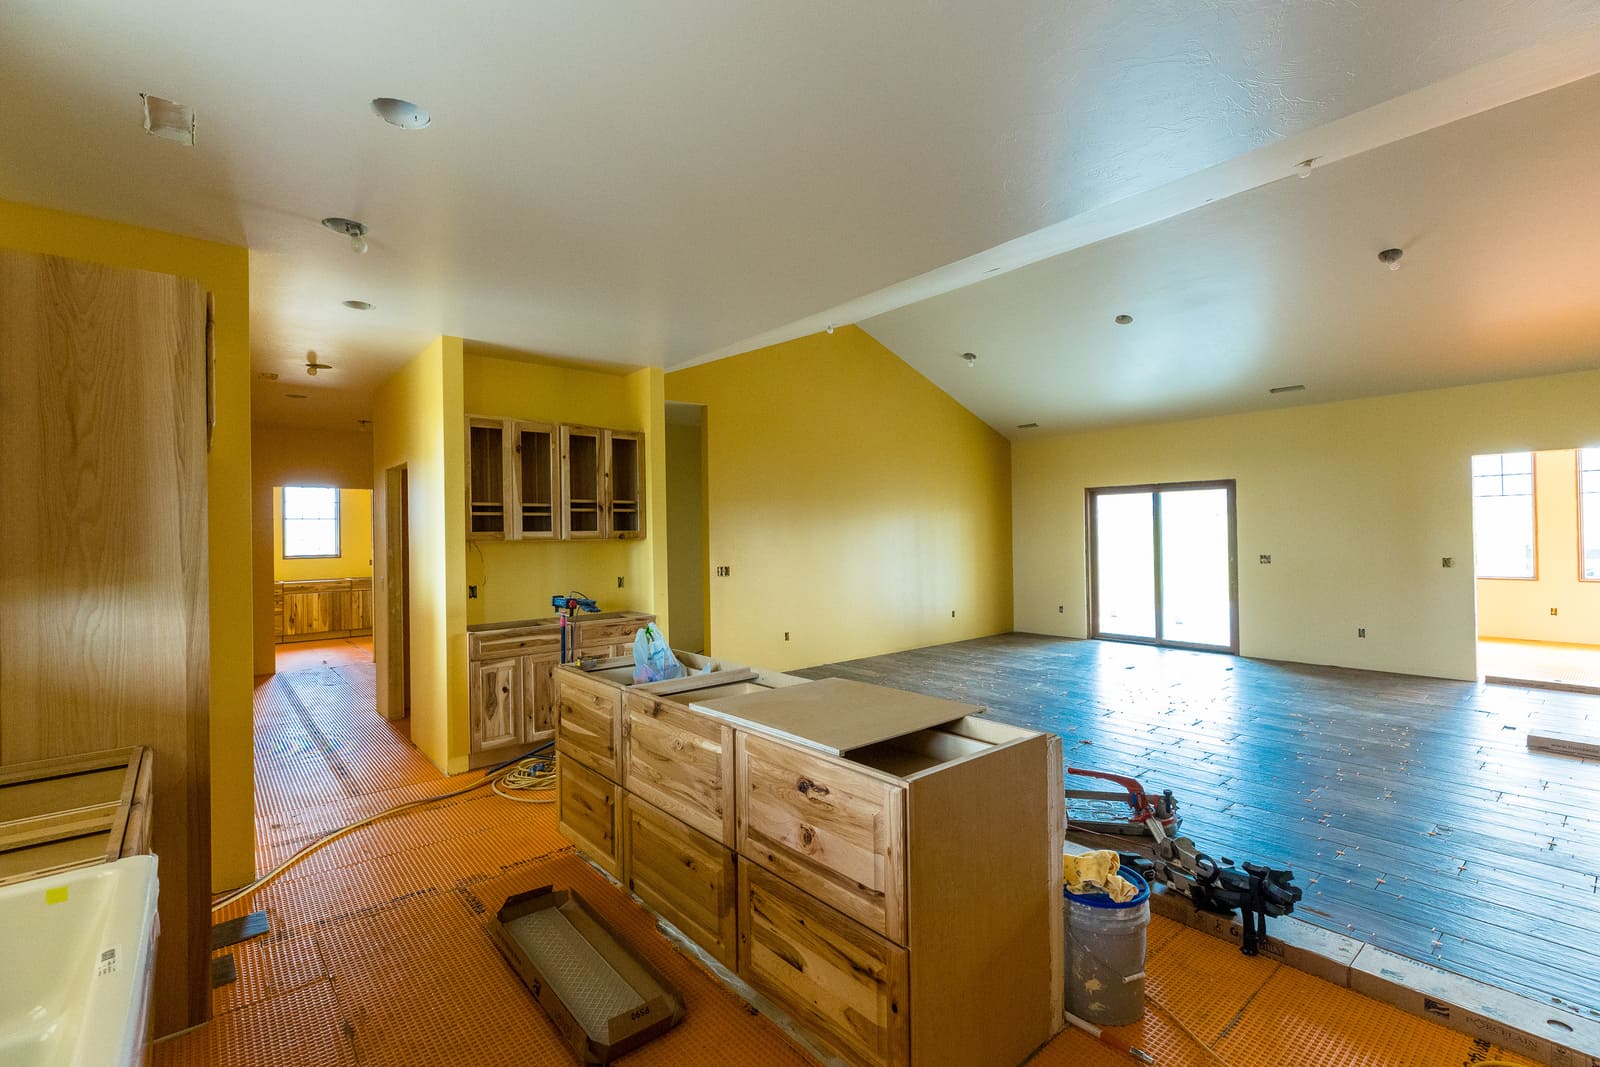 New construction kitchen and living room progress with open-concept layout